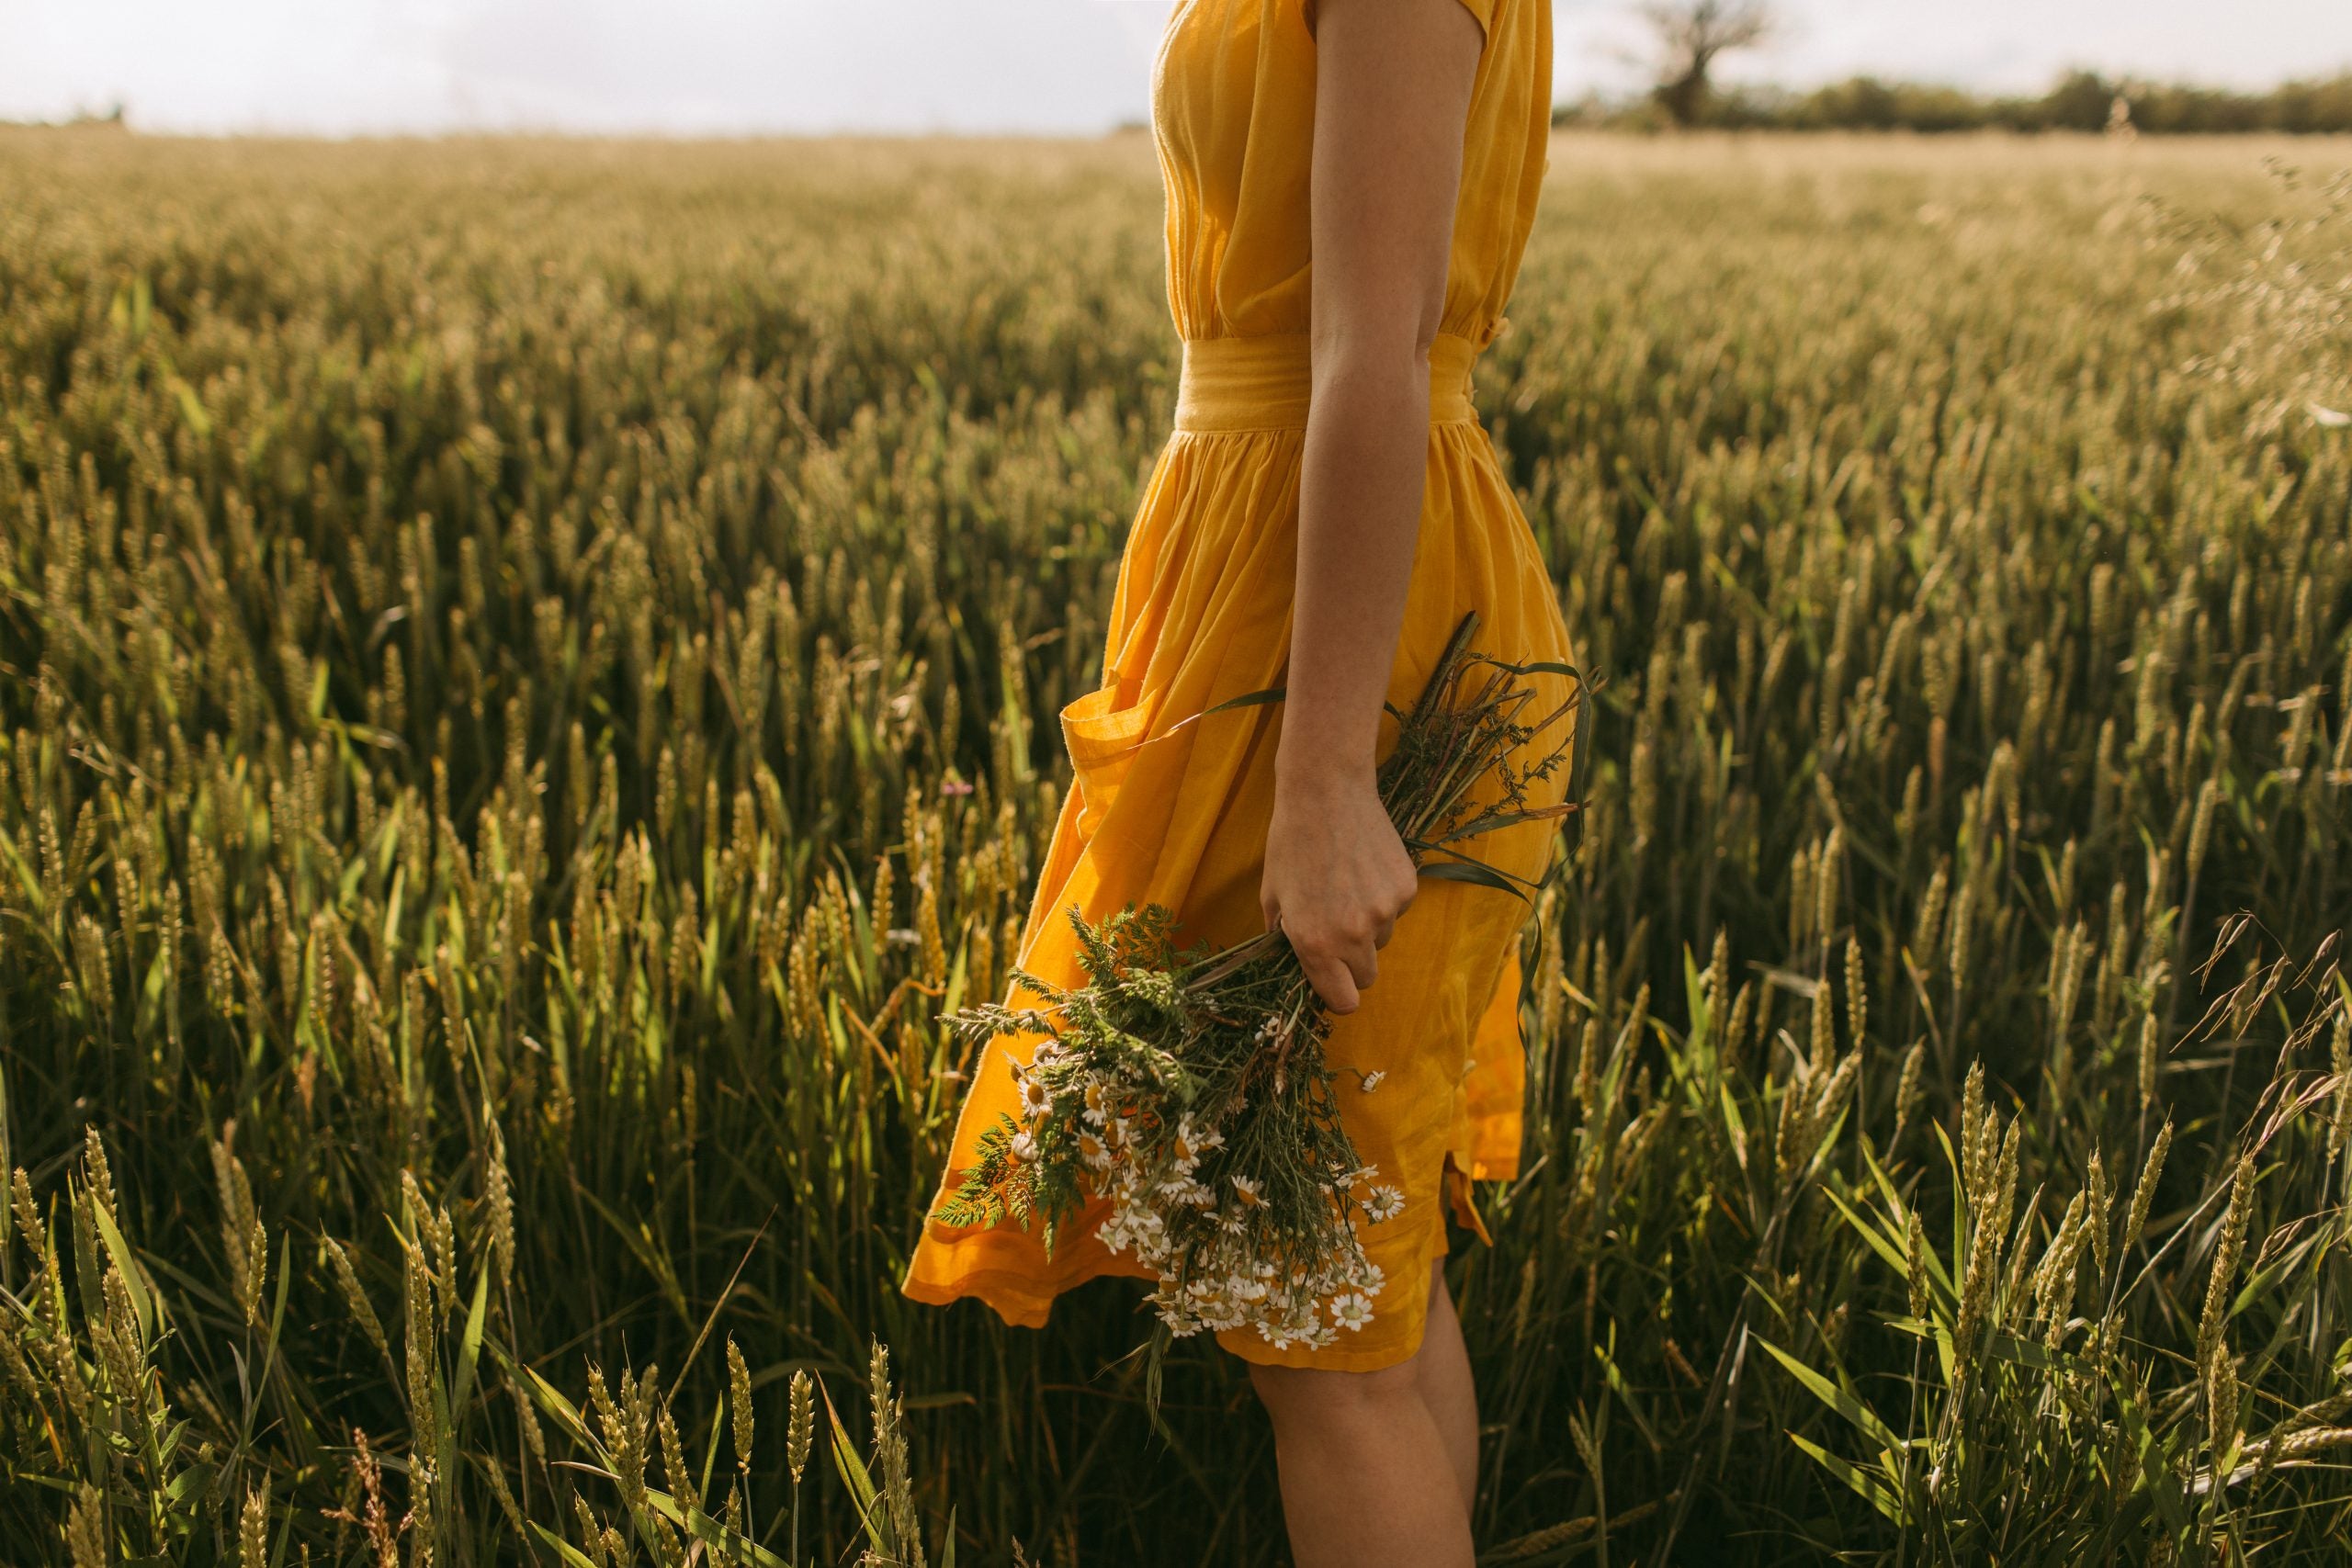 A woman in a yellow dress standing in a wheat field.